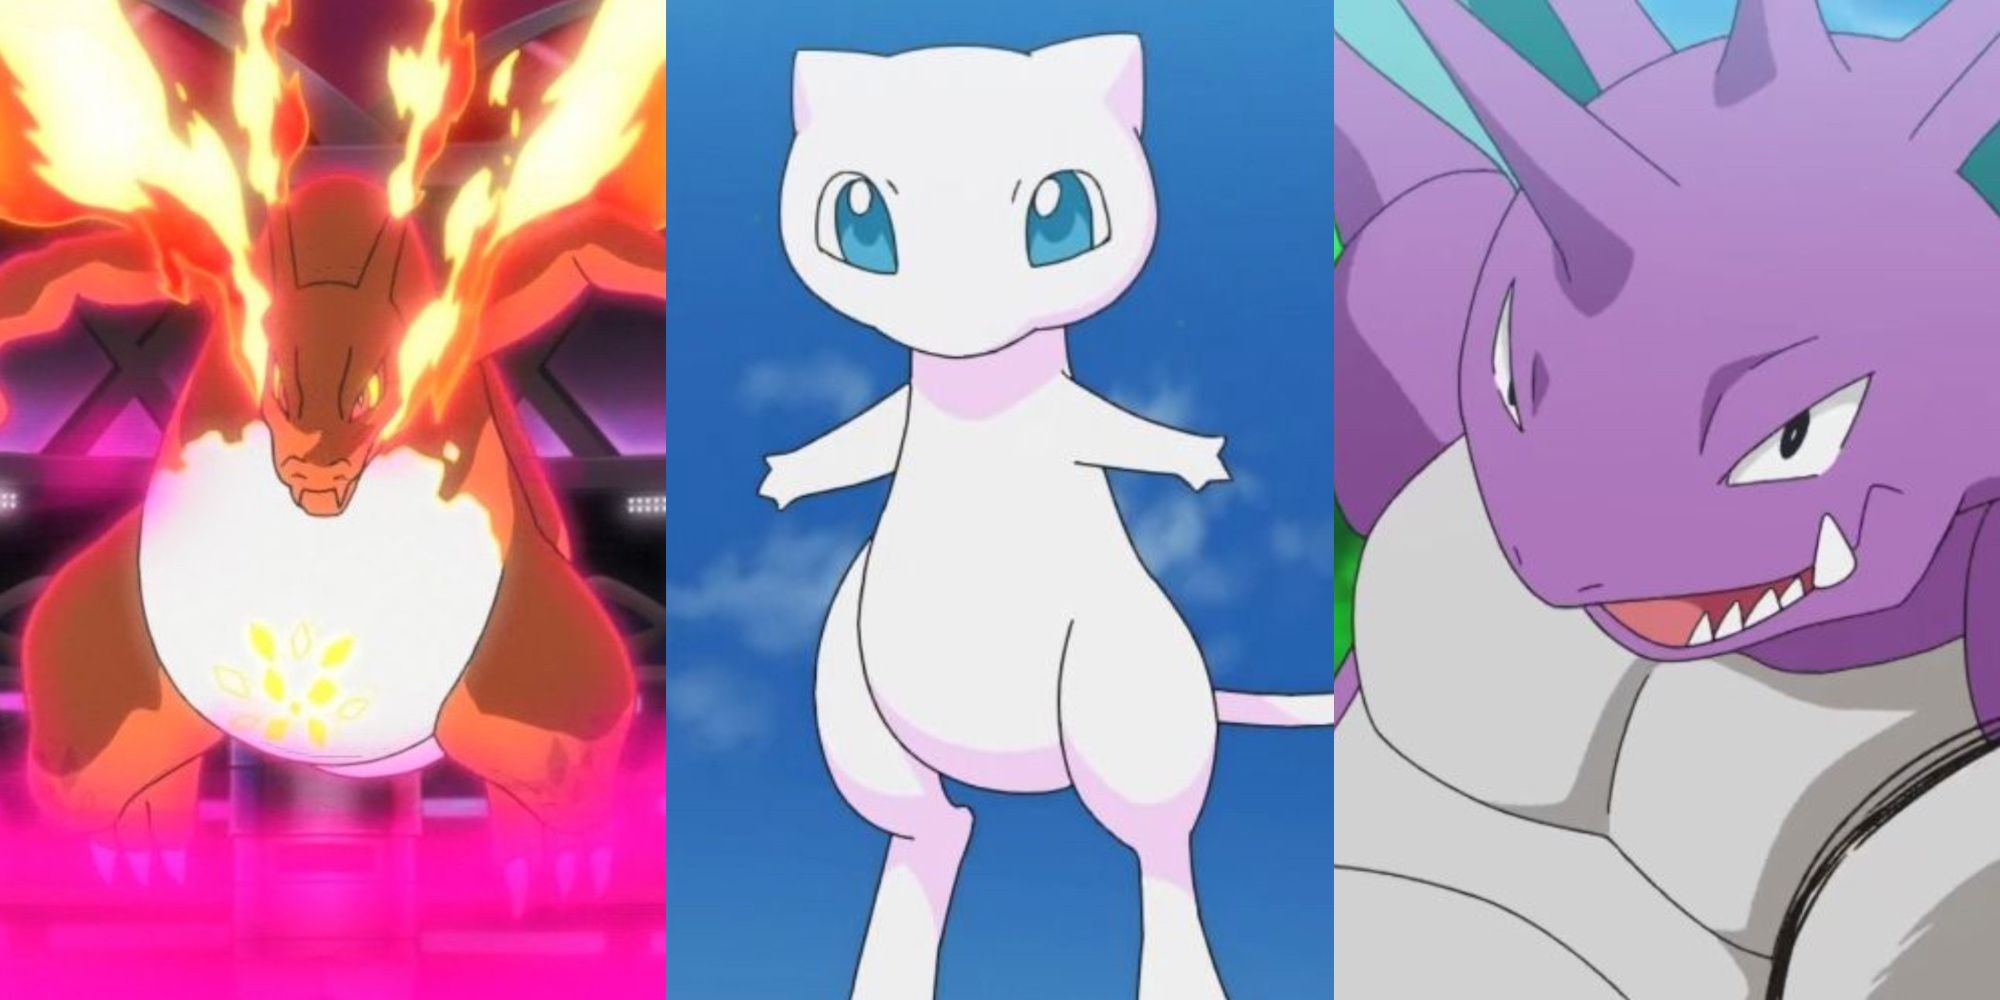 A split image of Gmax Charizard, Mew floating in the air, and Nidoking smirking in the Pokemon Anime.